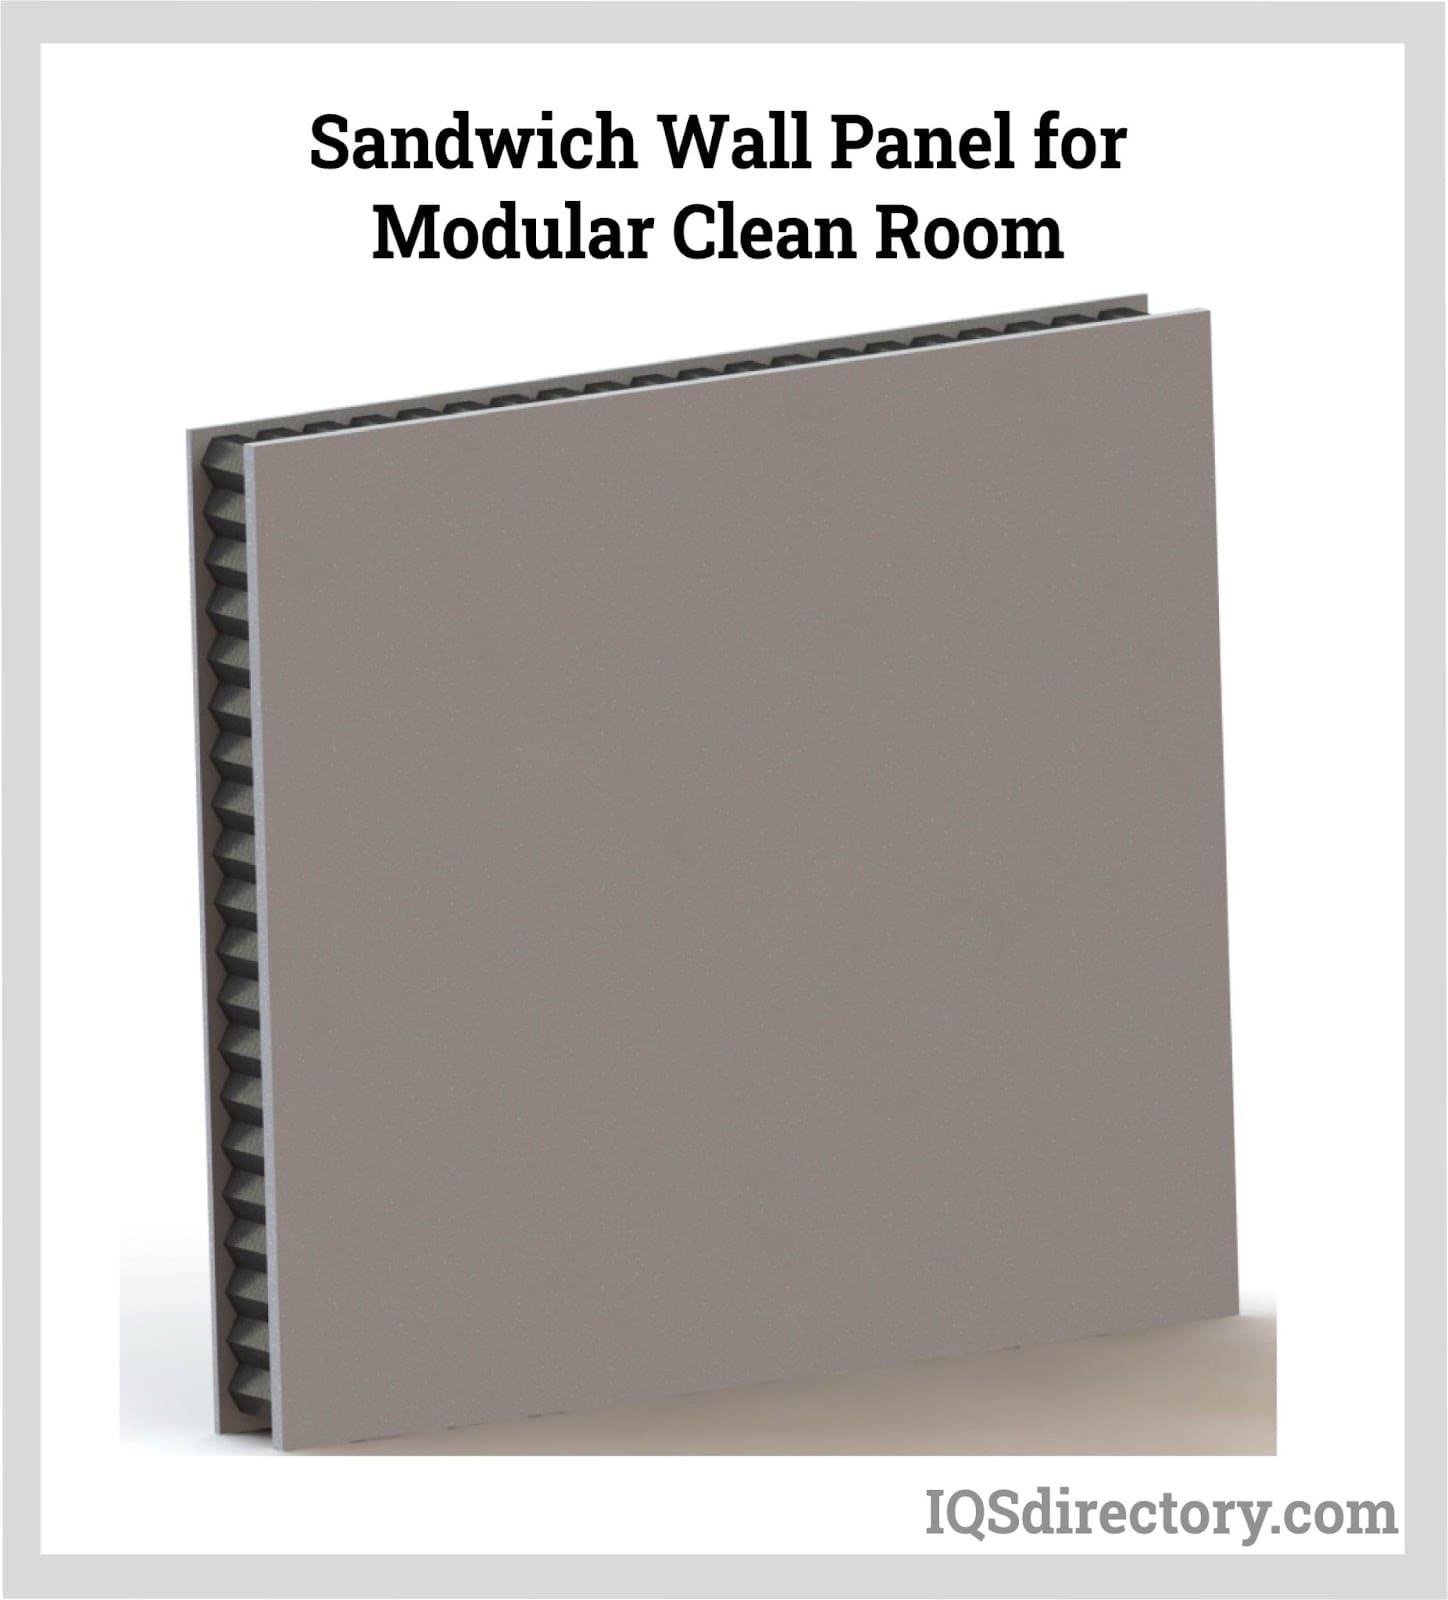 sandwich wall panel for modular clean room